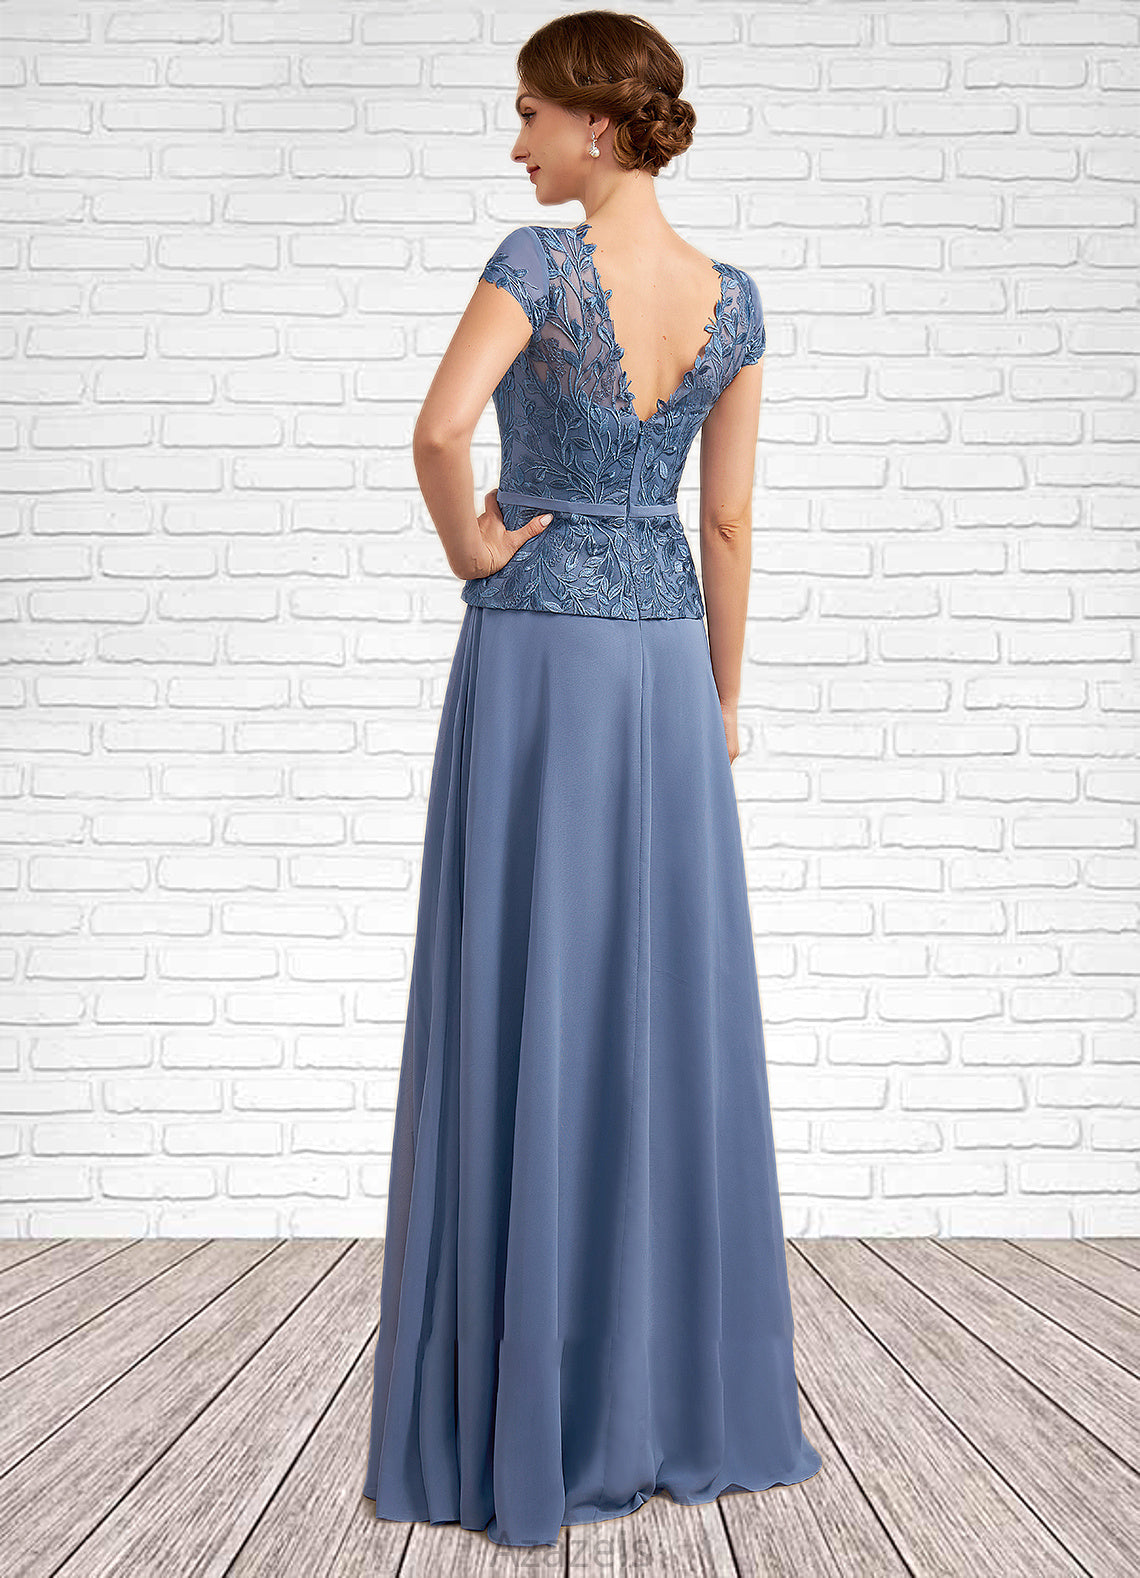 Nyasia A-Line Scoop Neck Floor-Length Chiffon Lace Mother of the Bride Dress DF126P0014989